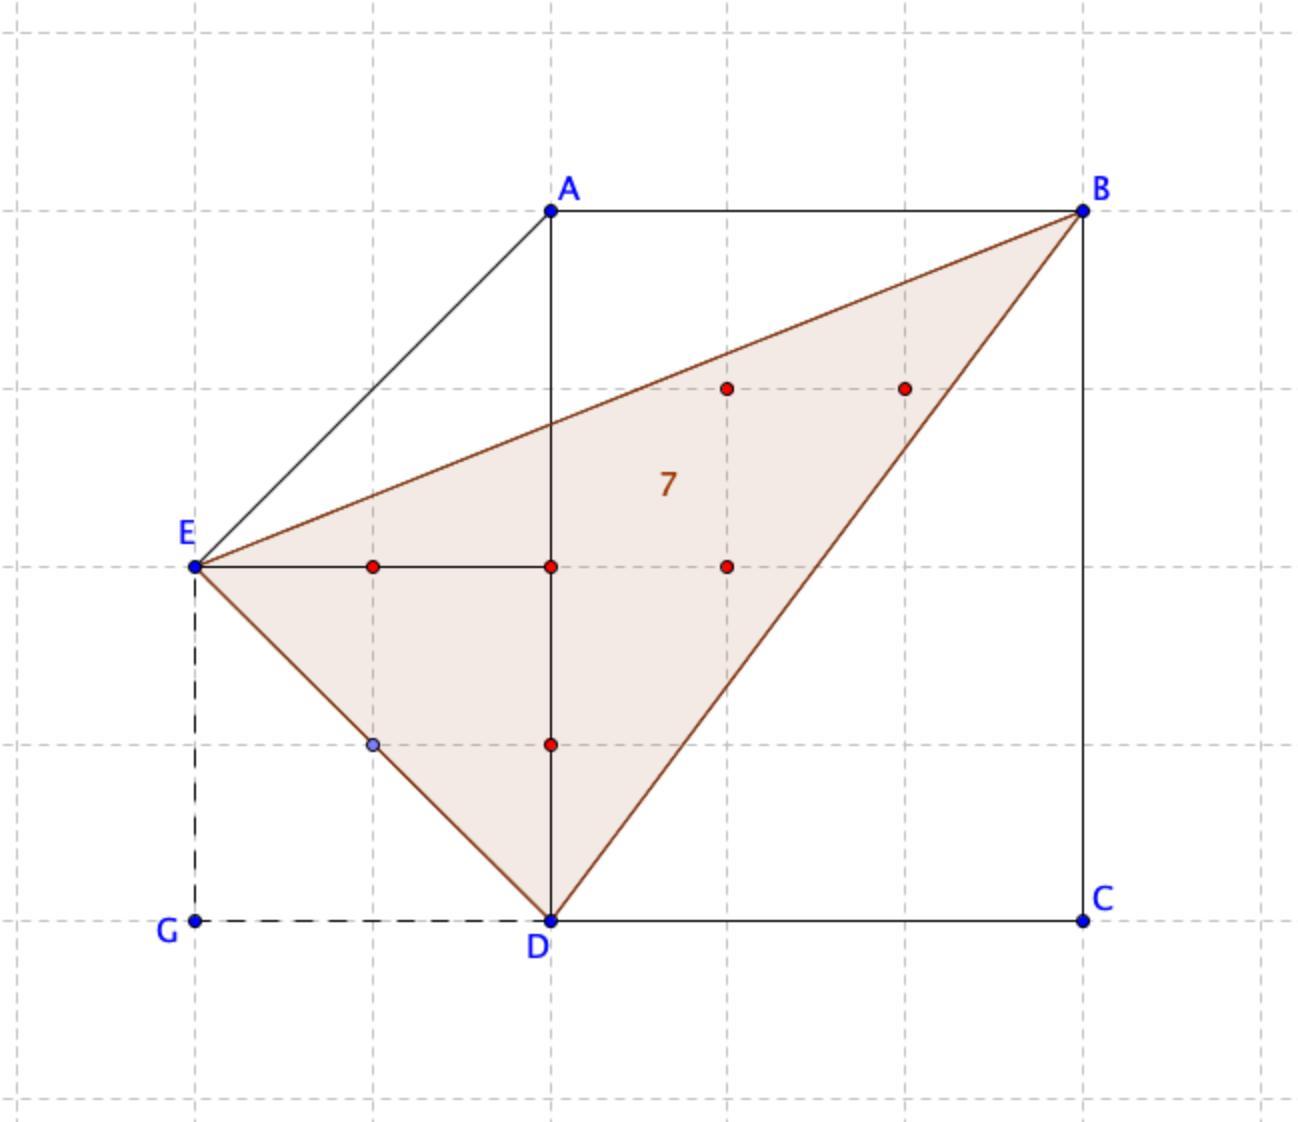 What Is The Area Of The Triangle?